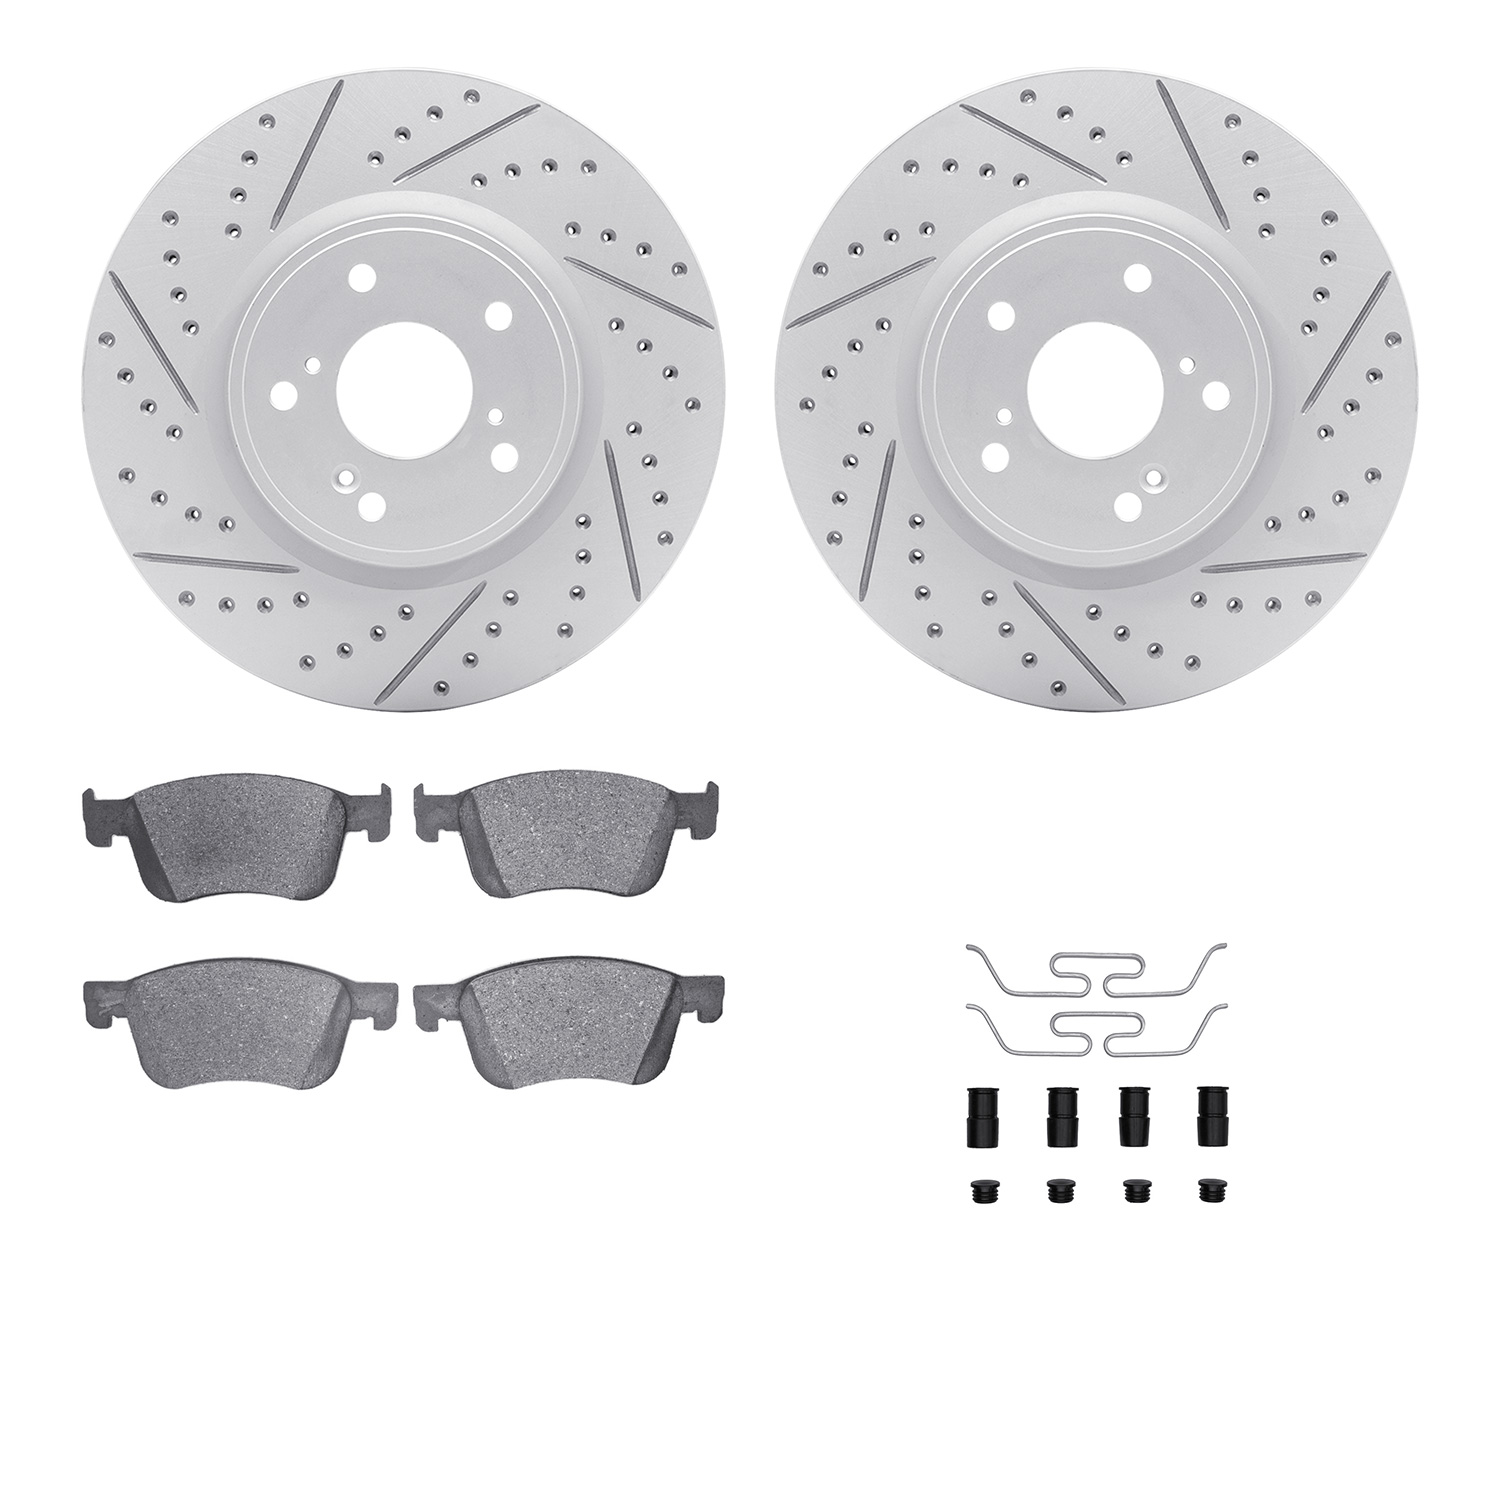 2512-59097 Geoperformance Drilled/Slotted Rotors w/5000 Advanced Brake Pads Kit & Hardware, Fits Select Acura/Honda, Position: F